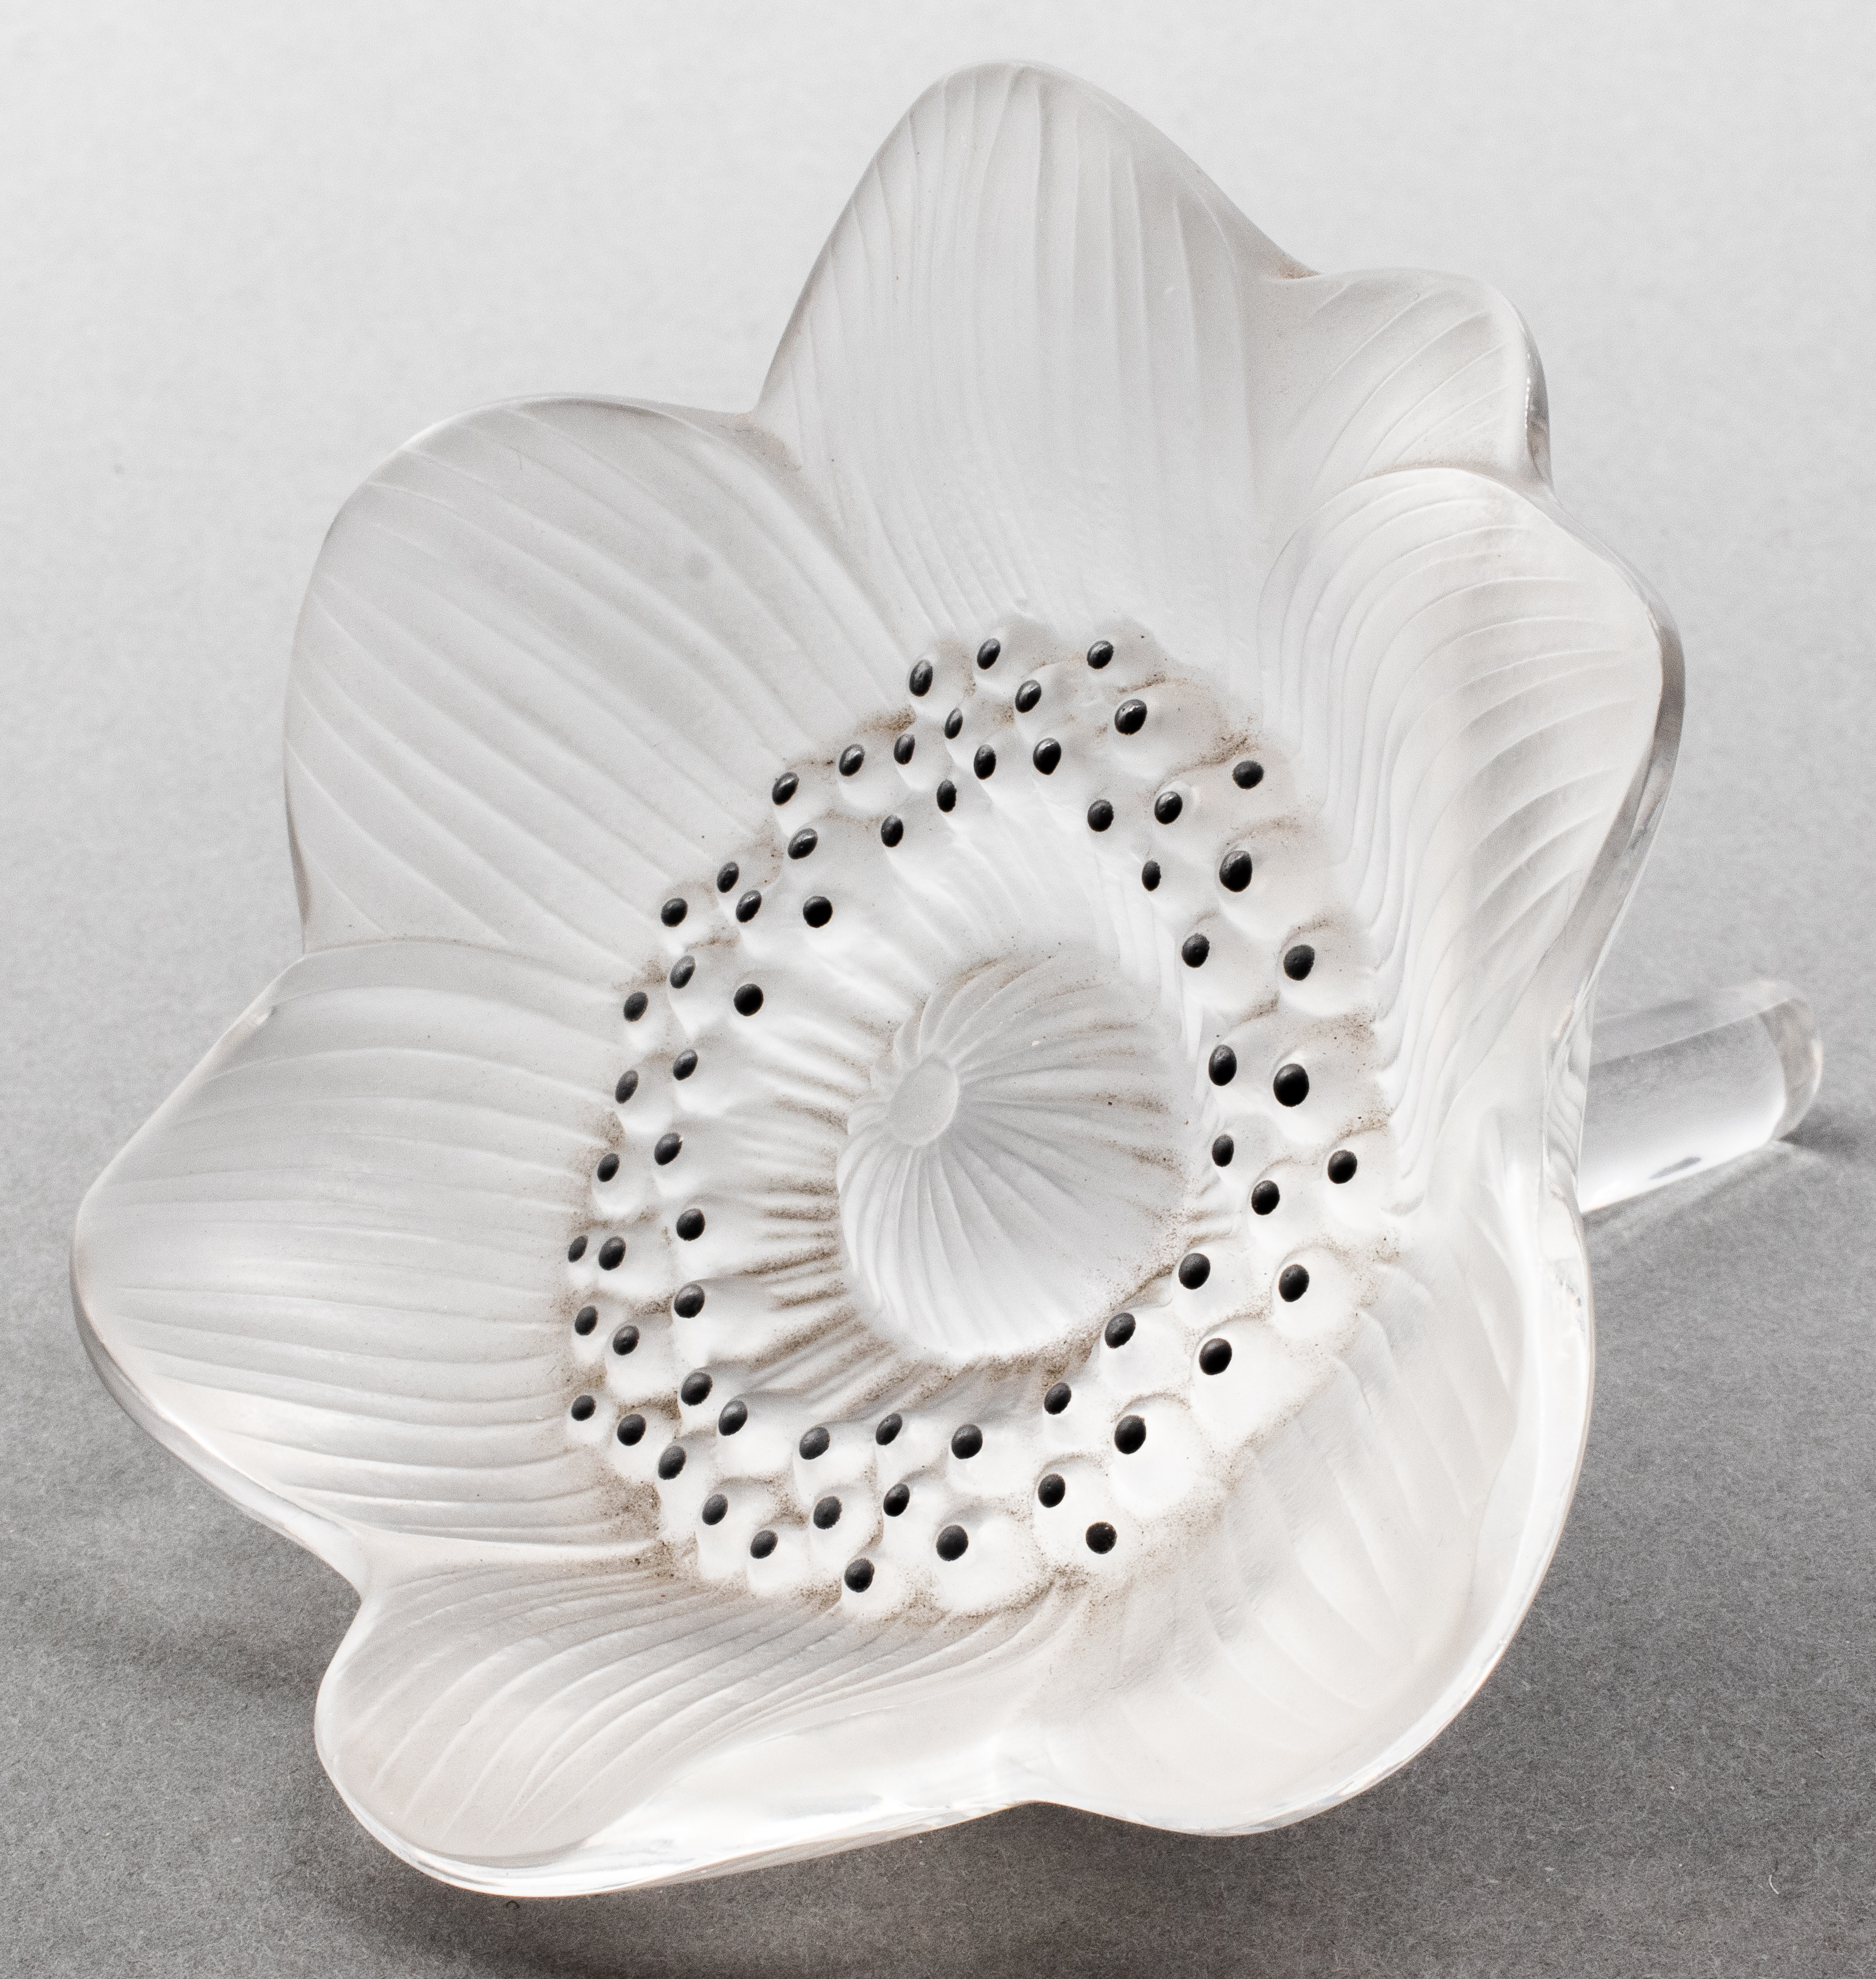 LALIQUE ANEMONE FROSTED ART GLASS 3c40ba